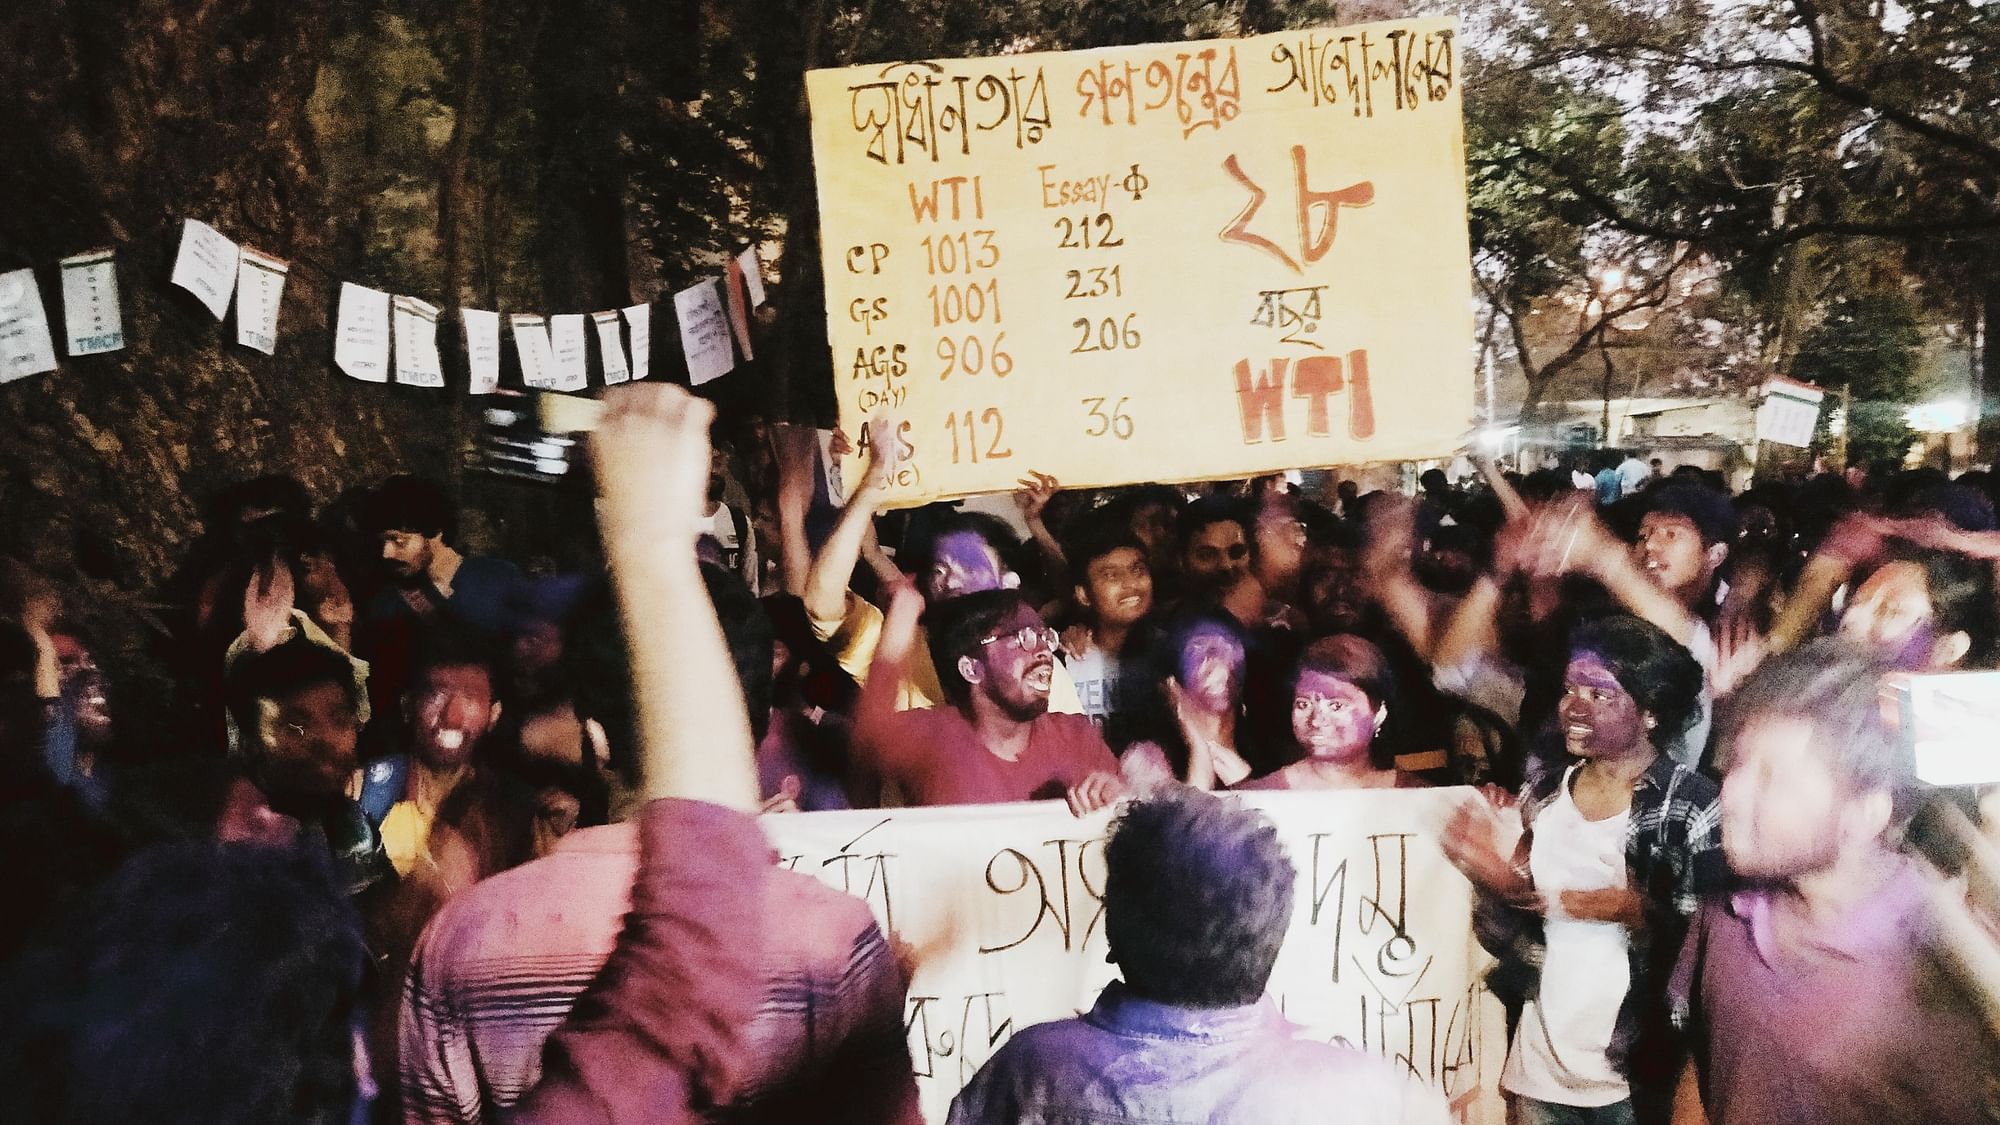 The Left retained its bastion in Kolkata’s Jadavpur University where elections to the student unions were held on 19 February 2020.